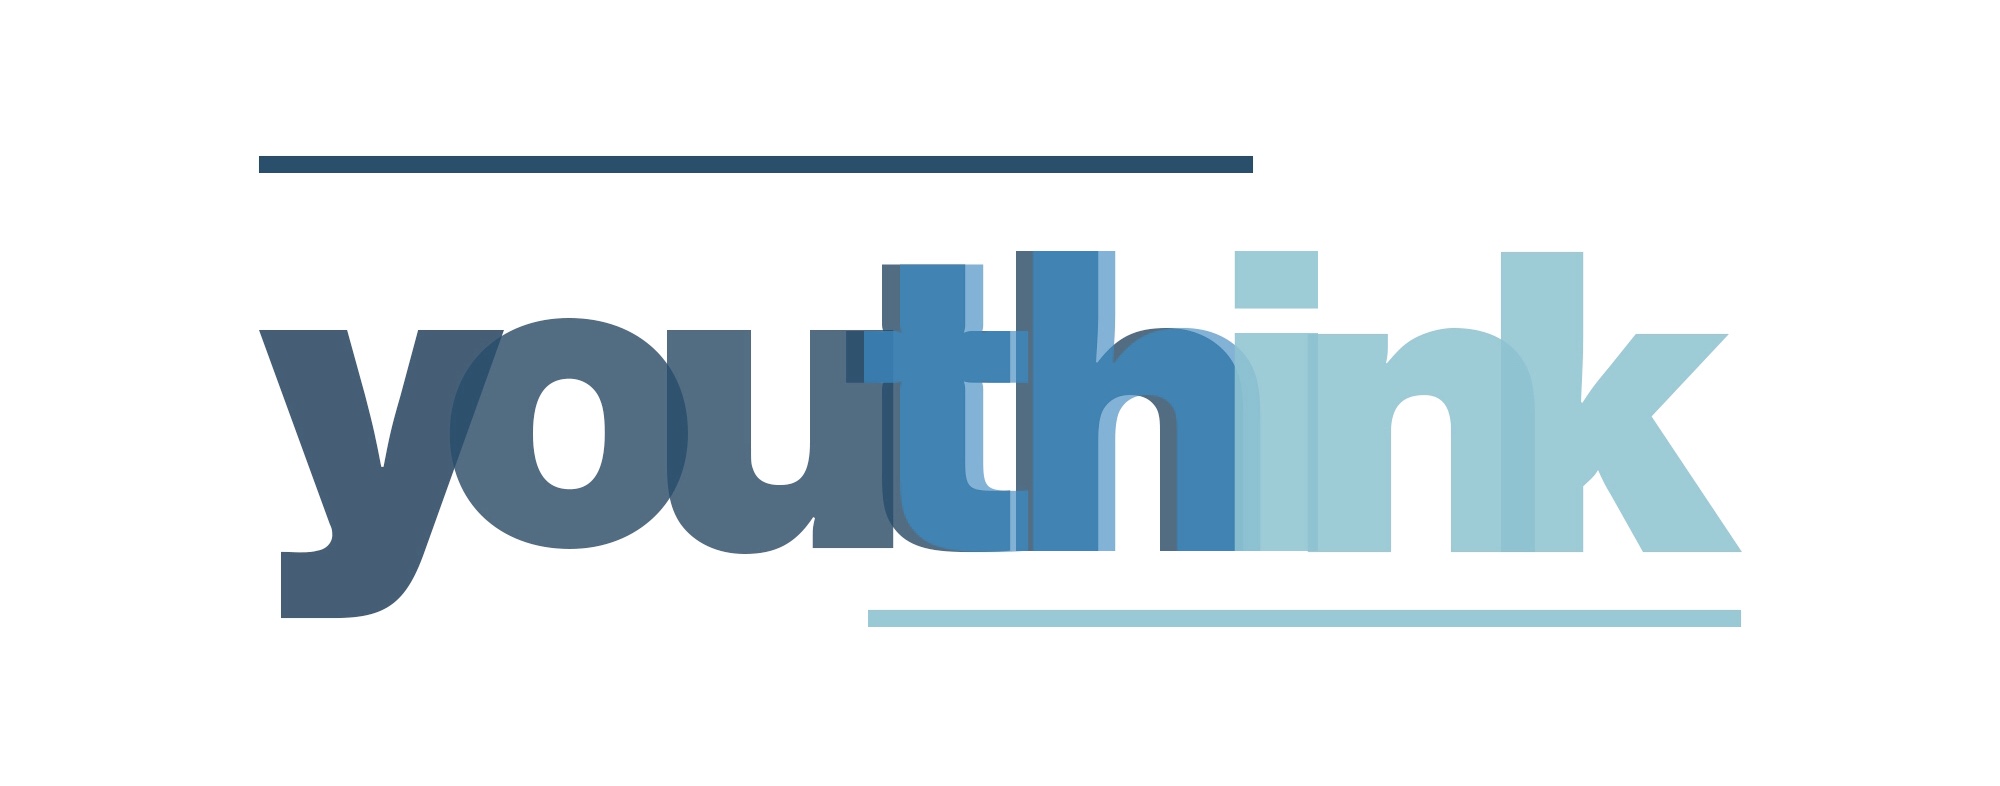 Youthink - A Policy-Oriented Youth Initiative